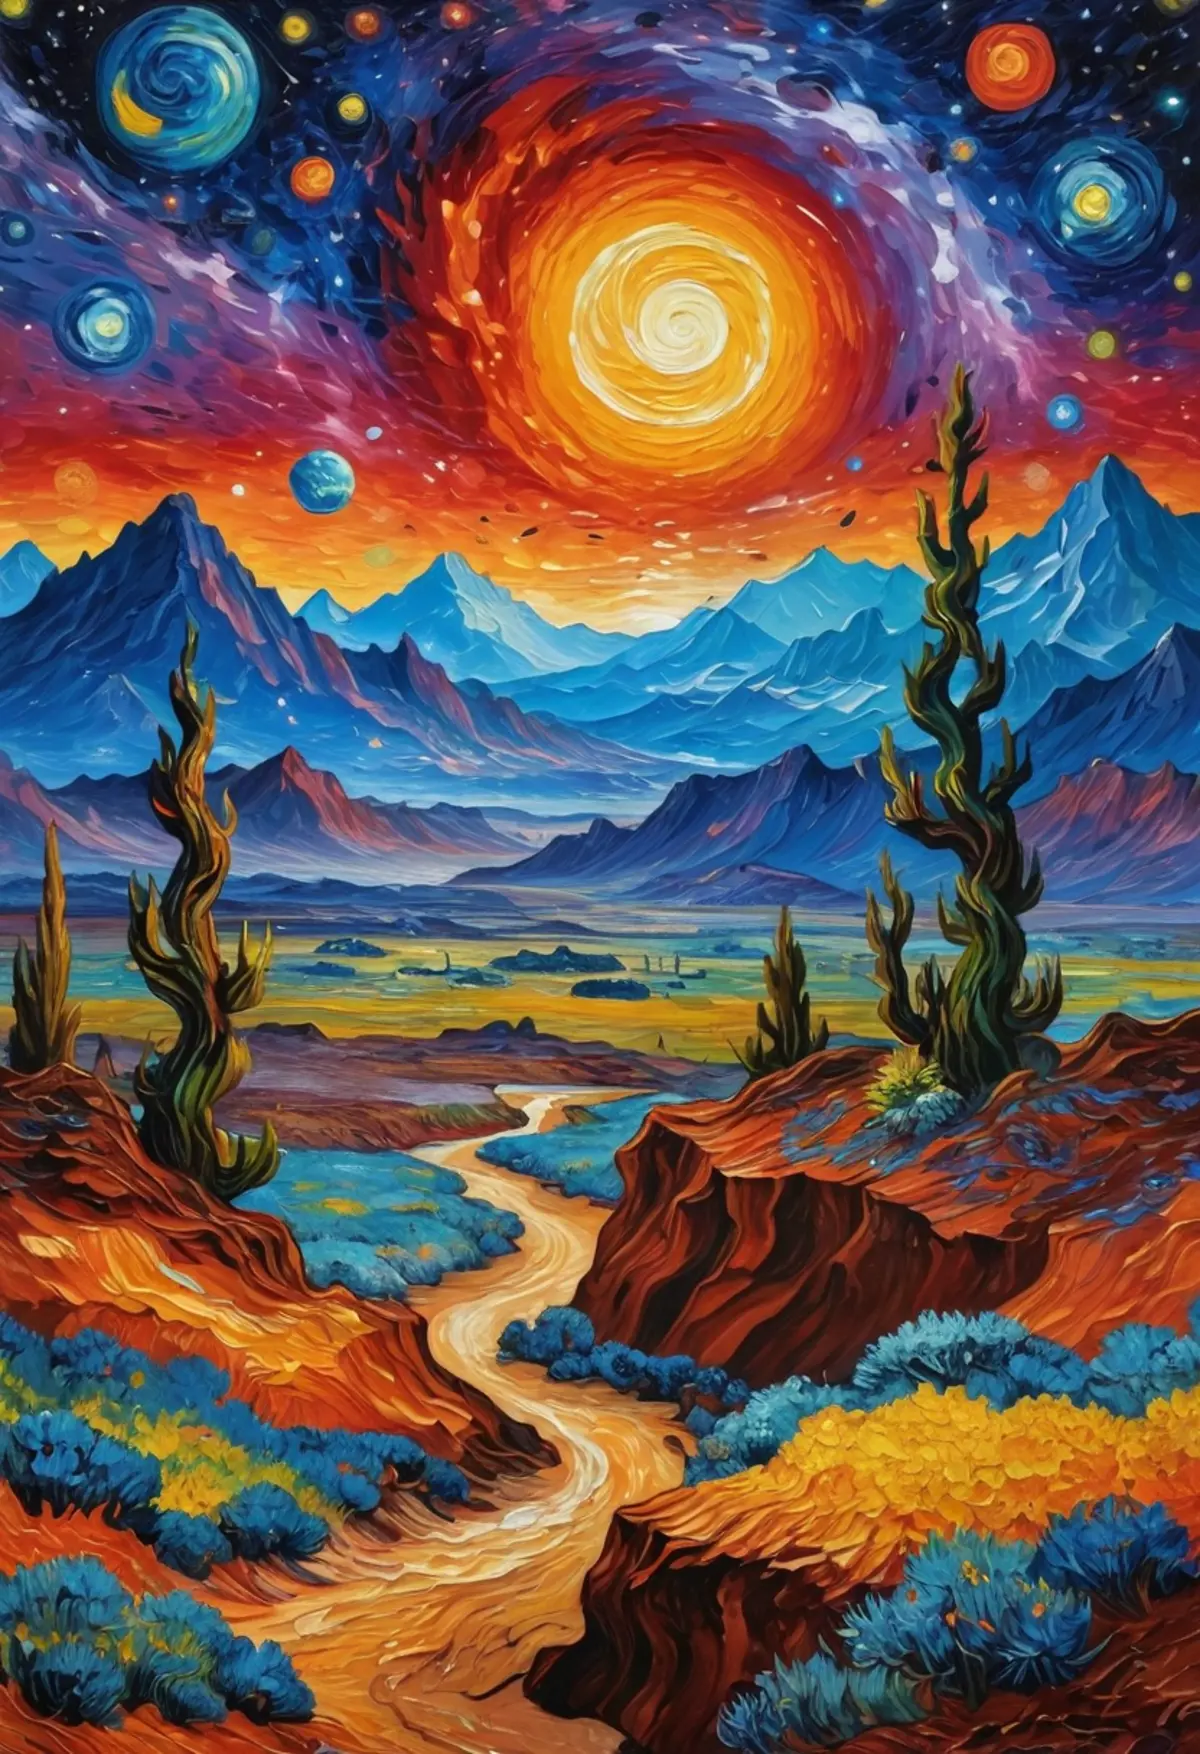 A colorful landscape with a winding path leading through a desert-like environment toward distant mountains. Above, a dramatic night sky is filled with an array of celestial bodies and a prominent swirling galaxy. 